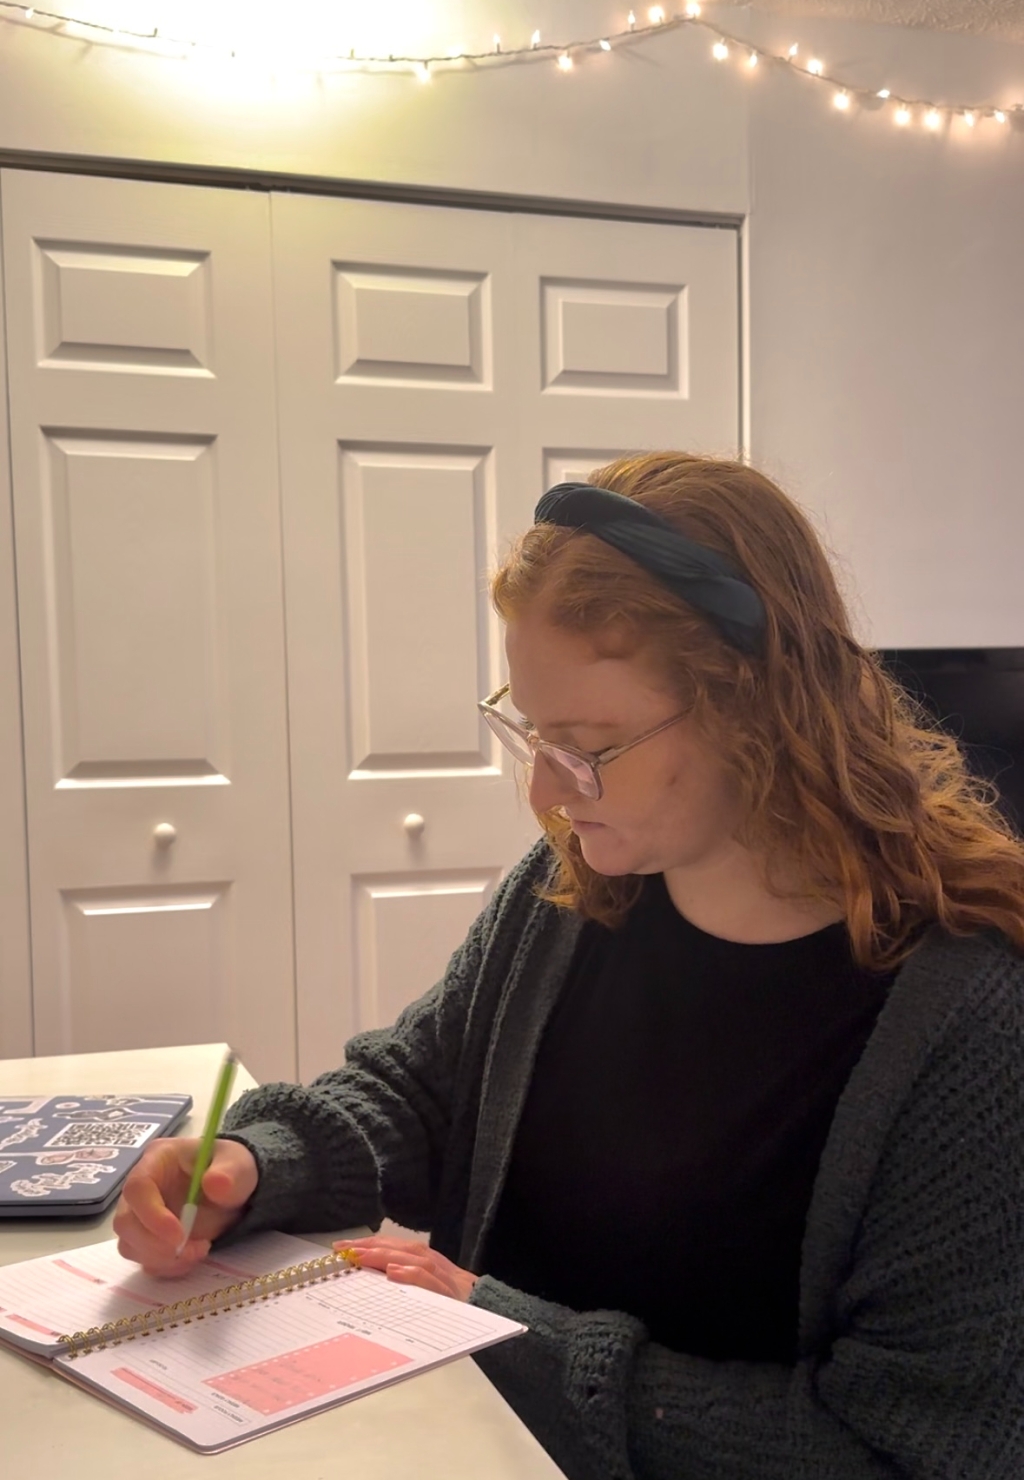 red haired woman sits at desk, writing in planner